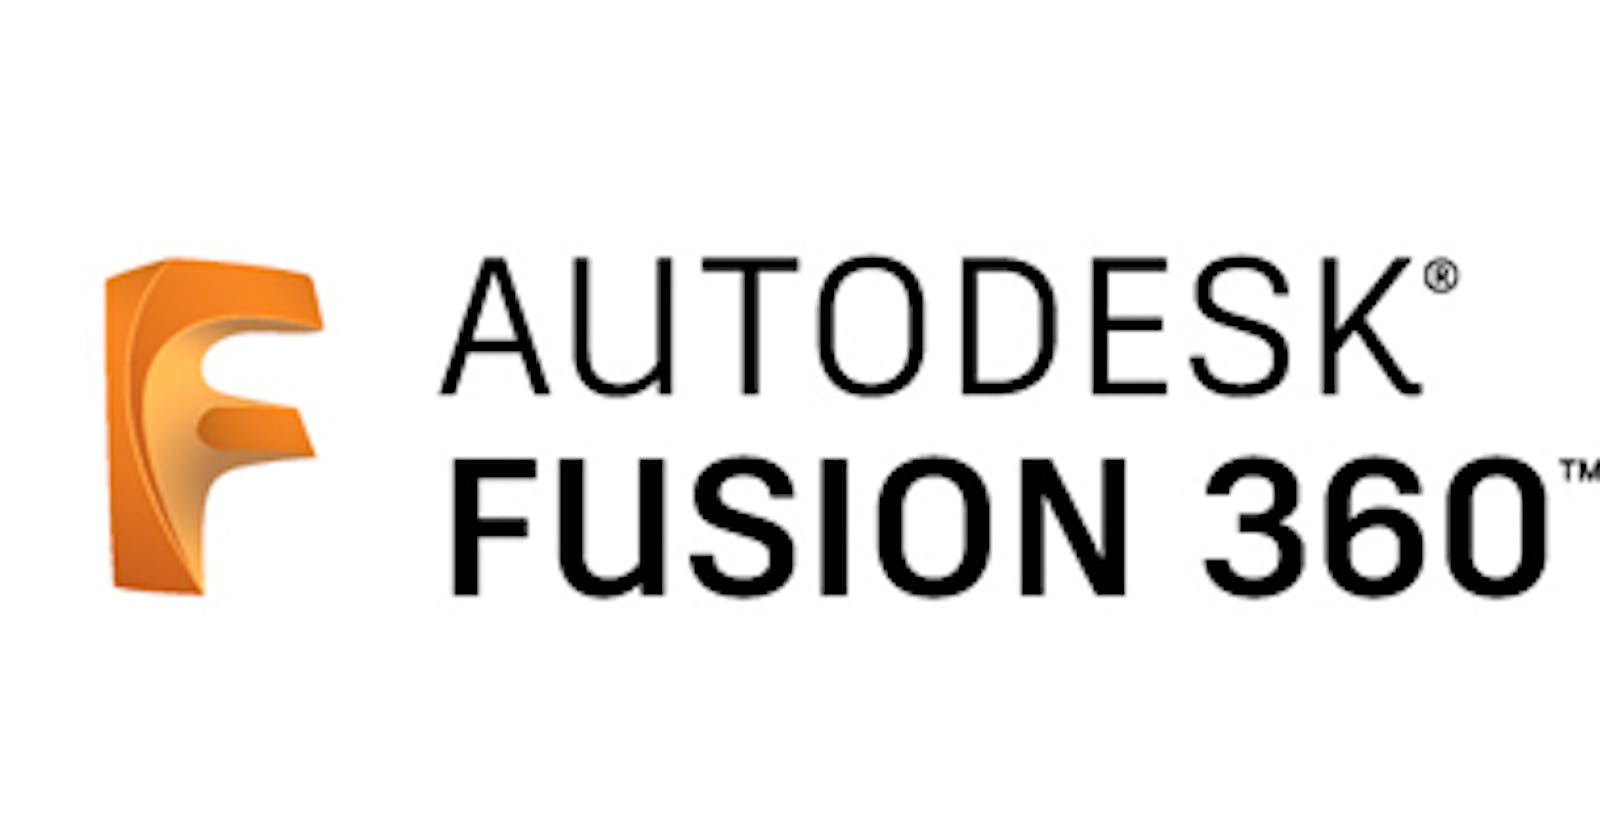 Re-packaging Autodesk Fusion360 for MSIX in the Windows Store